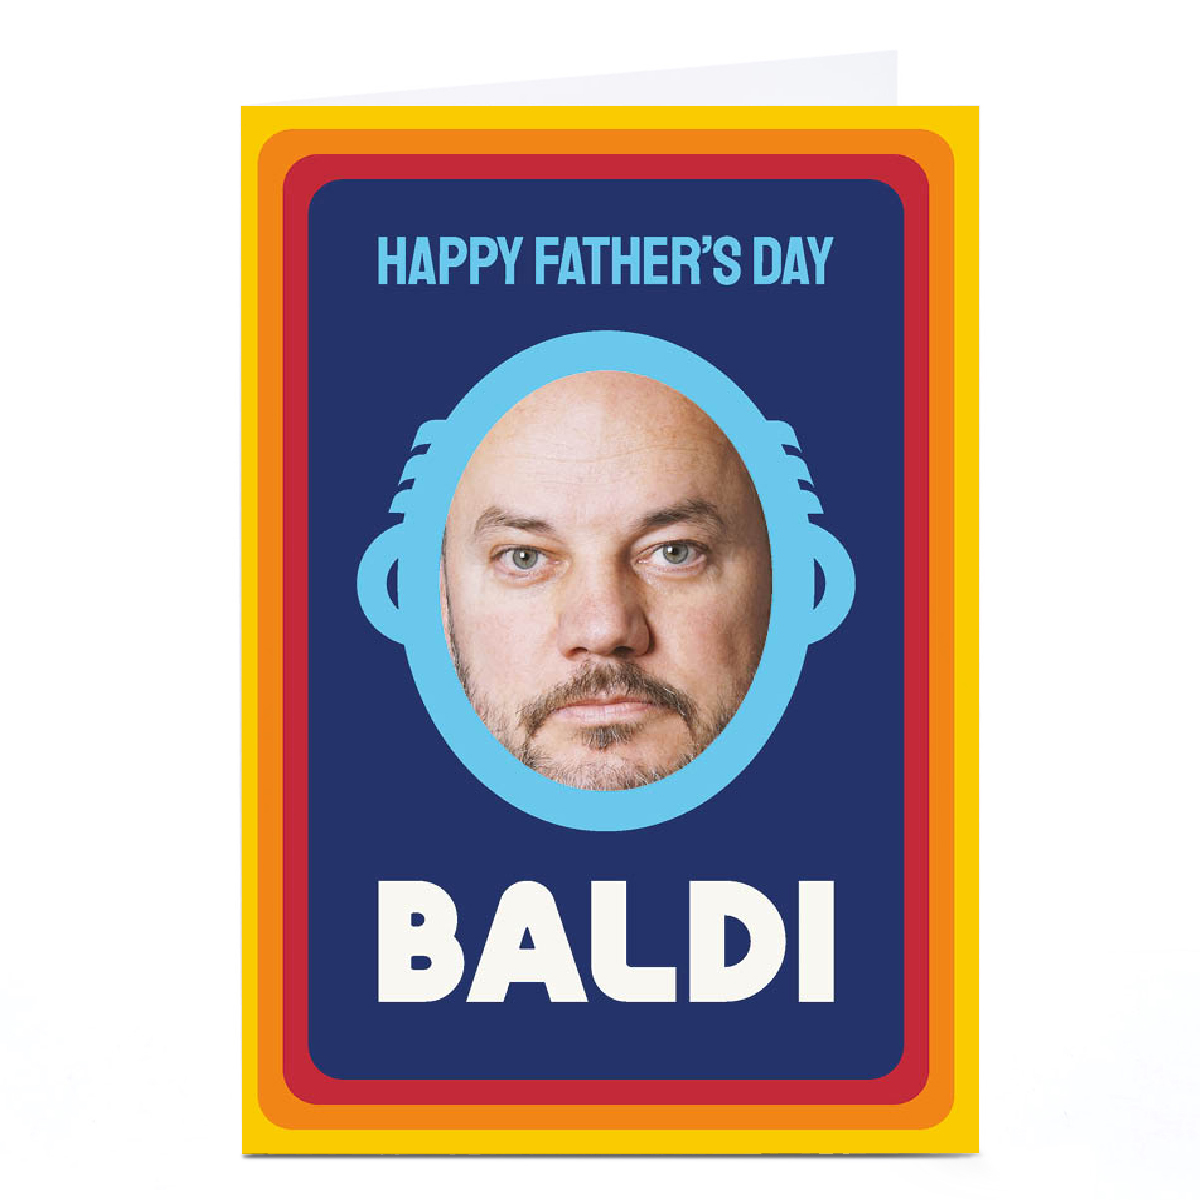 Personalised PG Quips Father's Day Card - BALDI